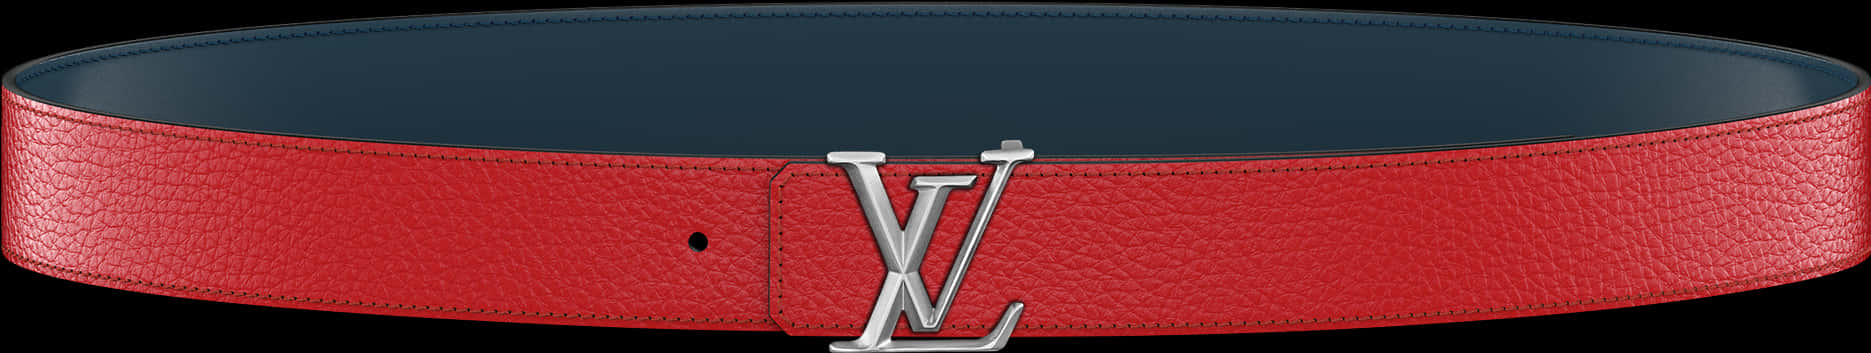 A Red And Blue Belt With Silver Metal Letter On It